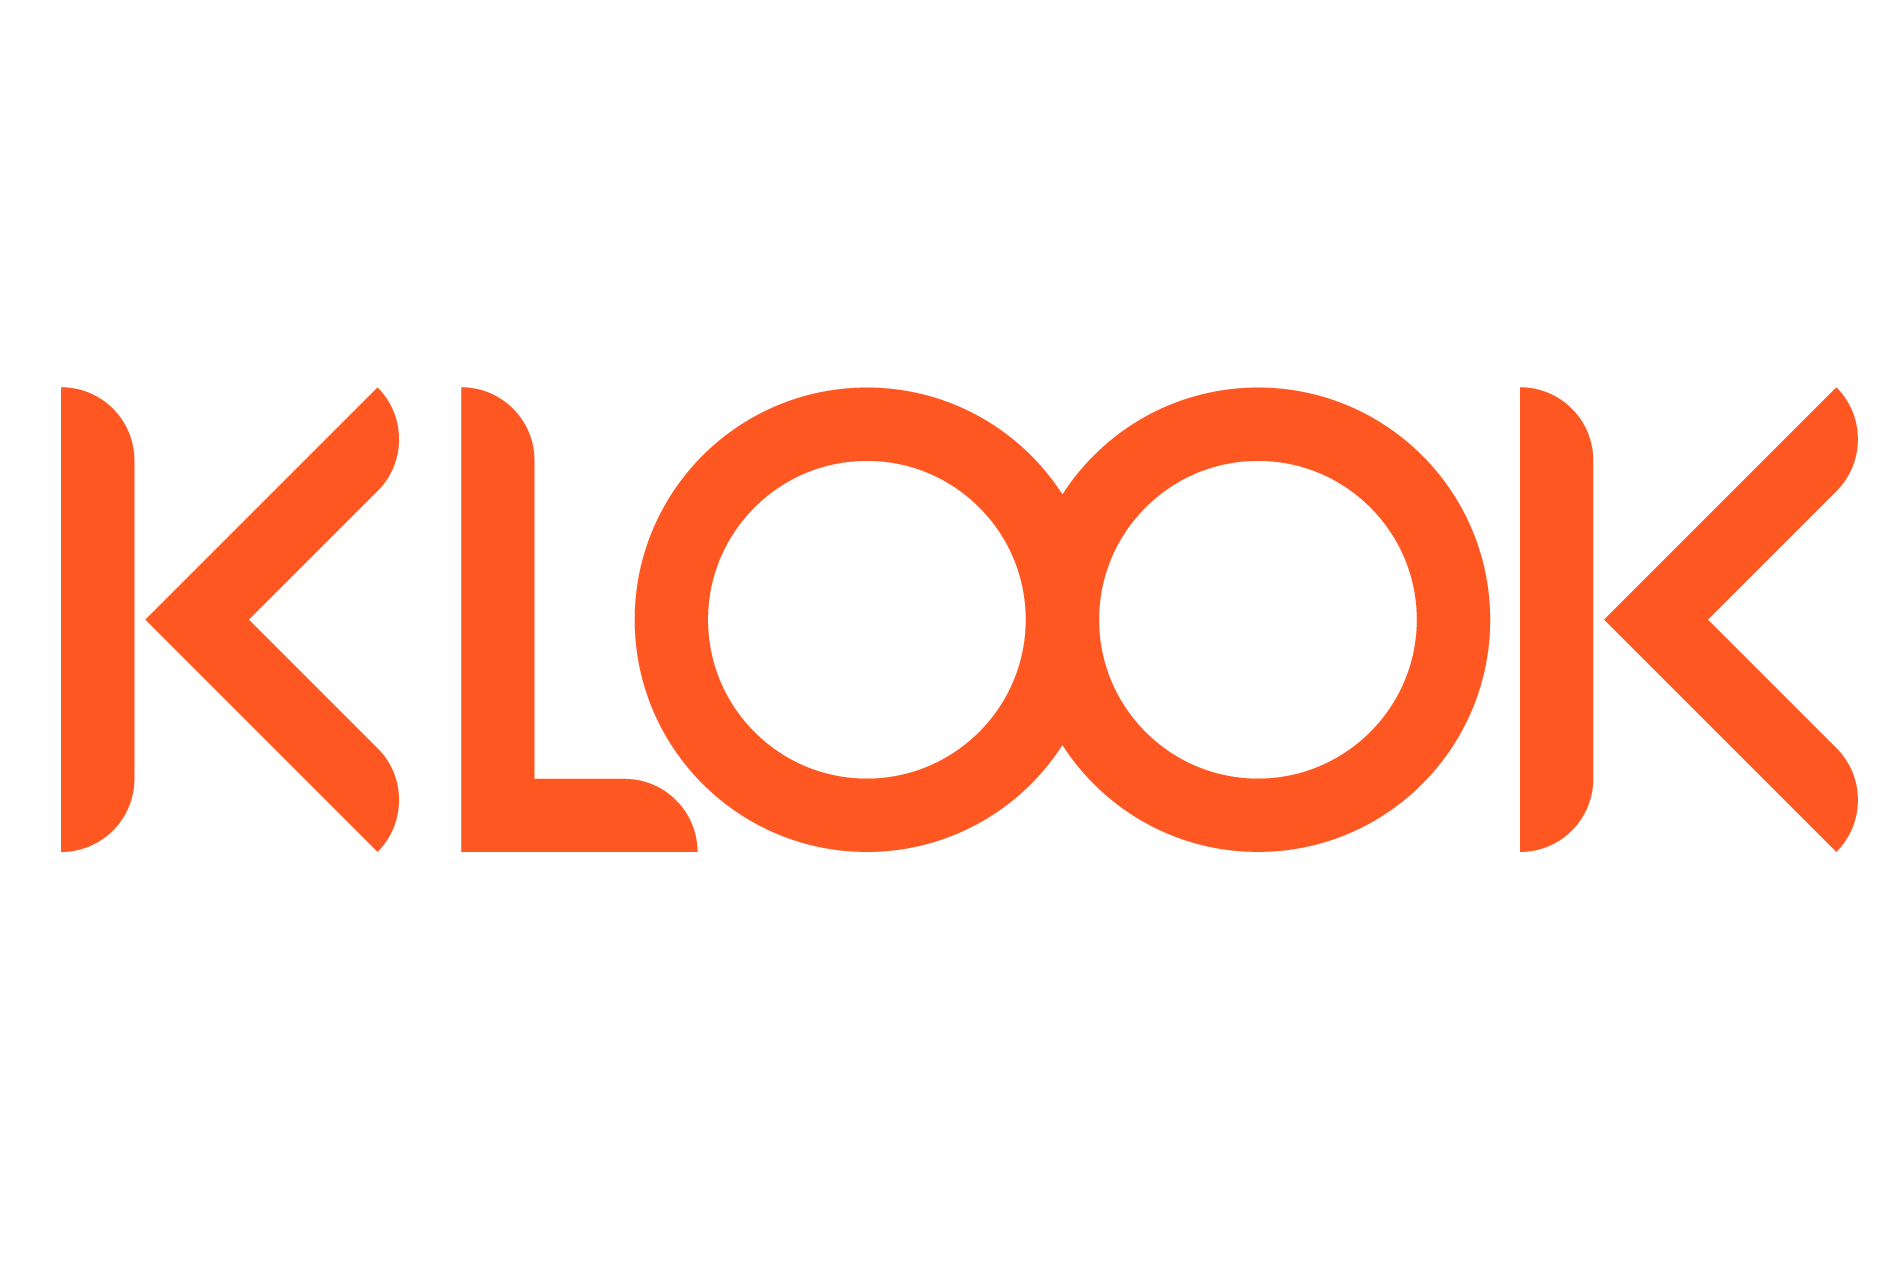 MaxTour and Klook